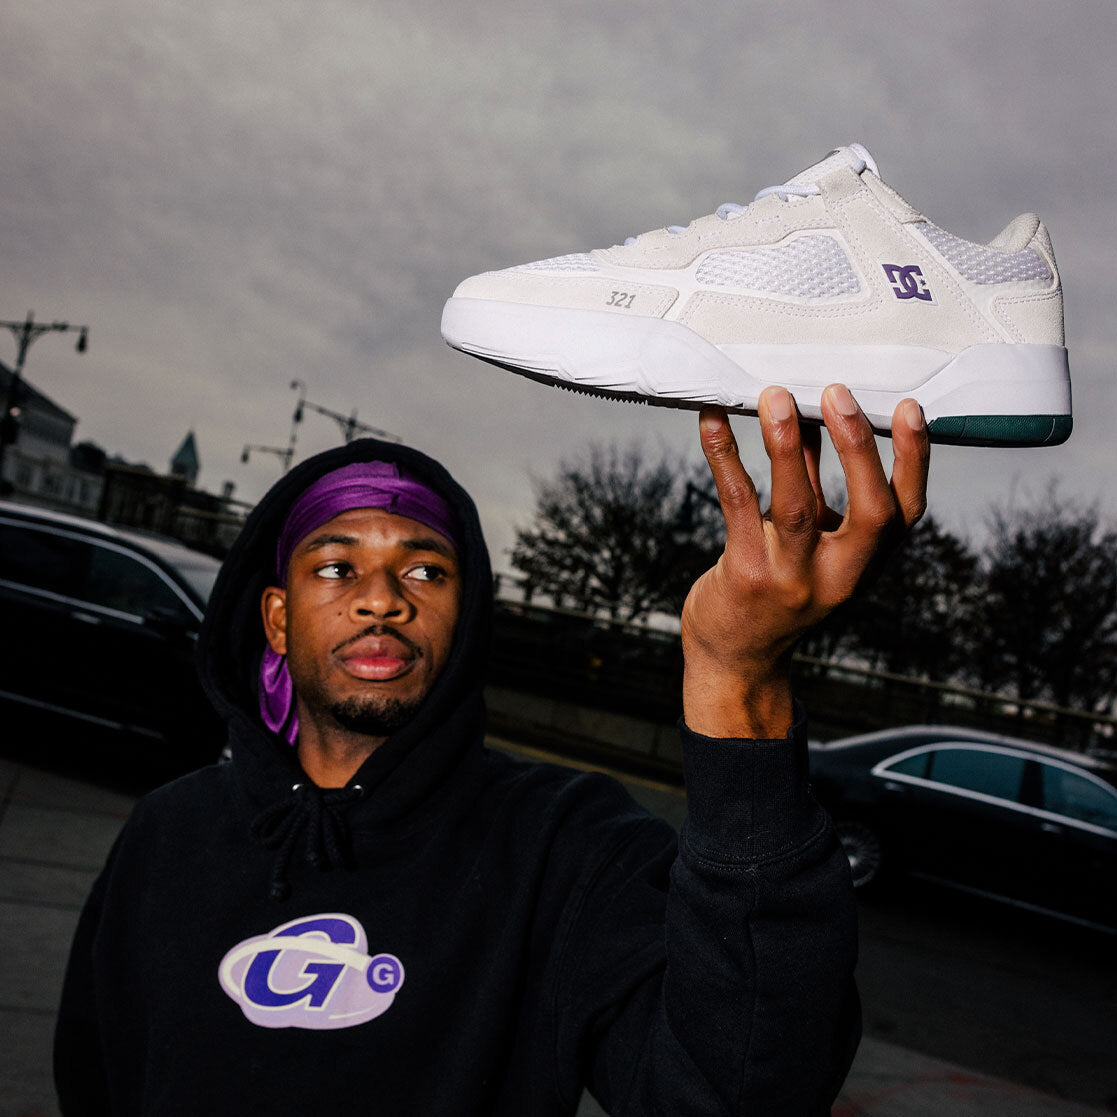 Ish Cepeda holding the Men's Metric S X Ish Cepeda Shoes in White/Purple